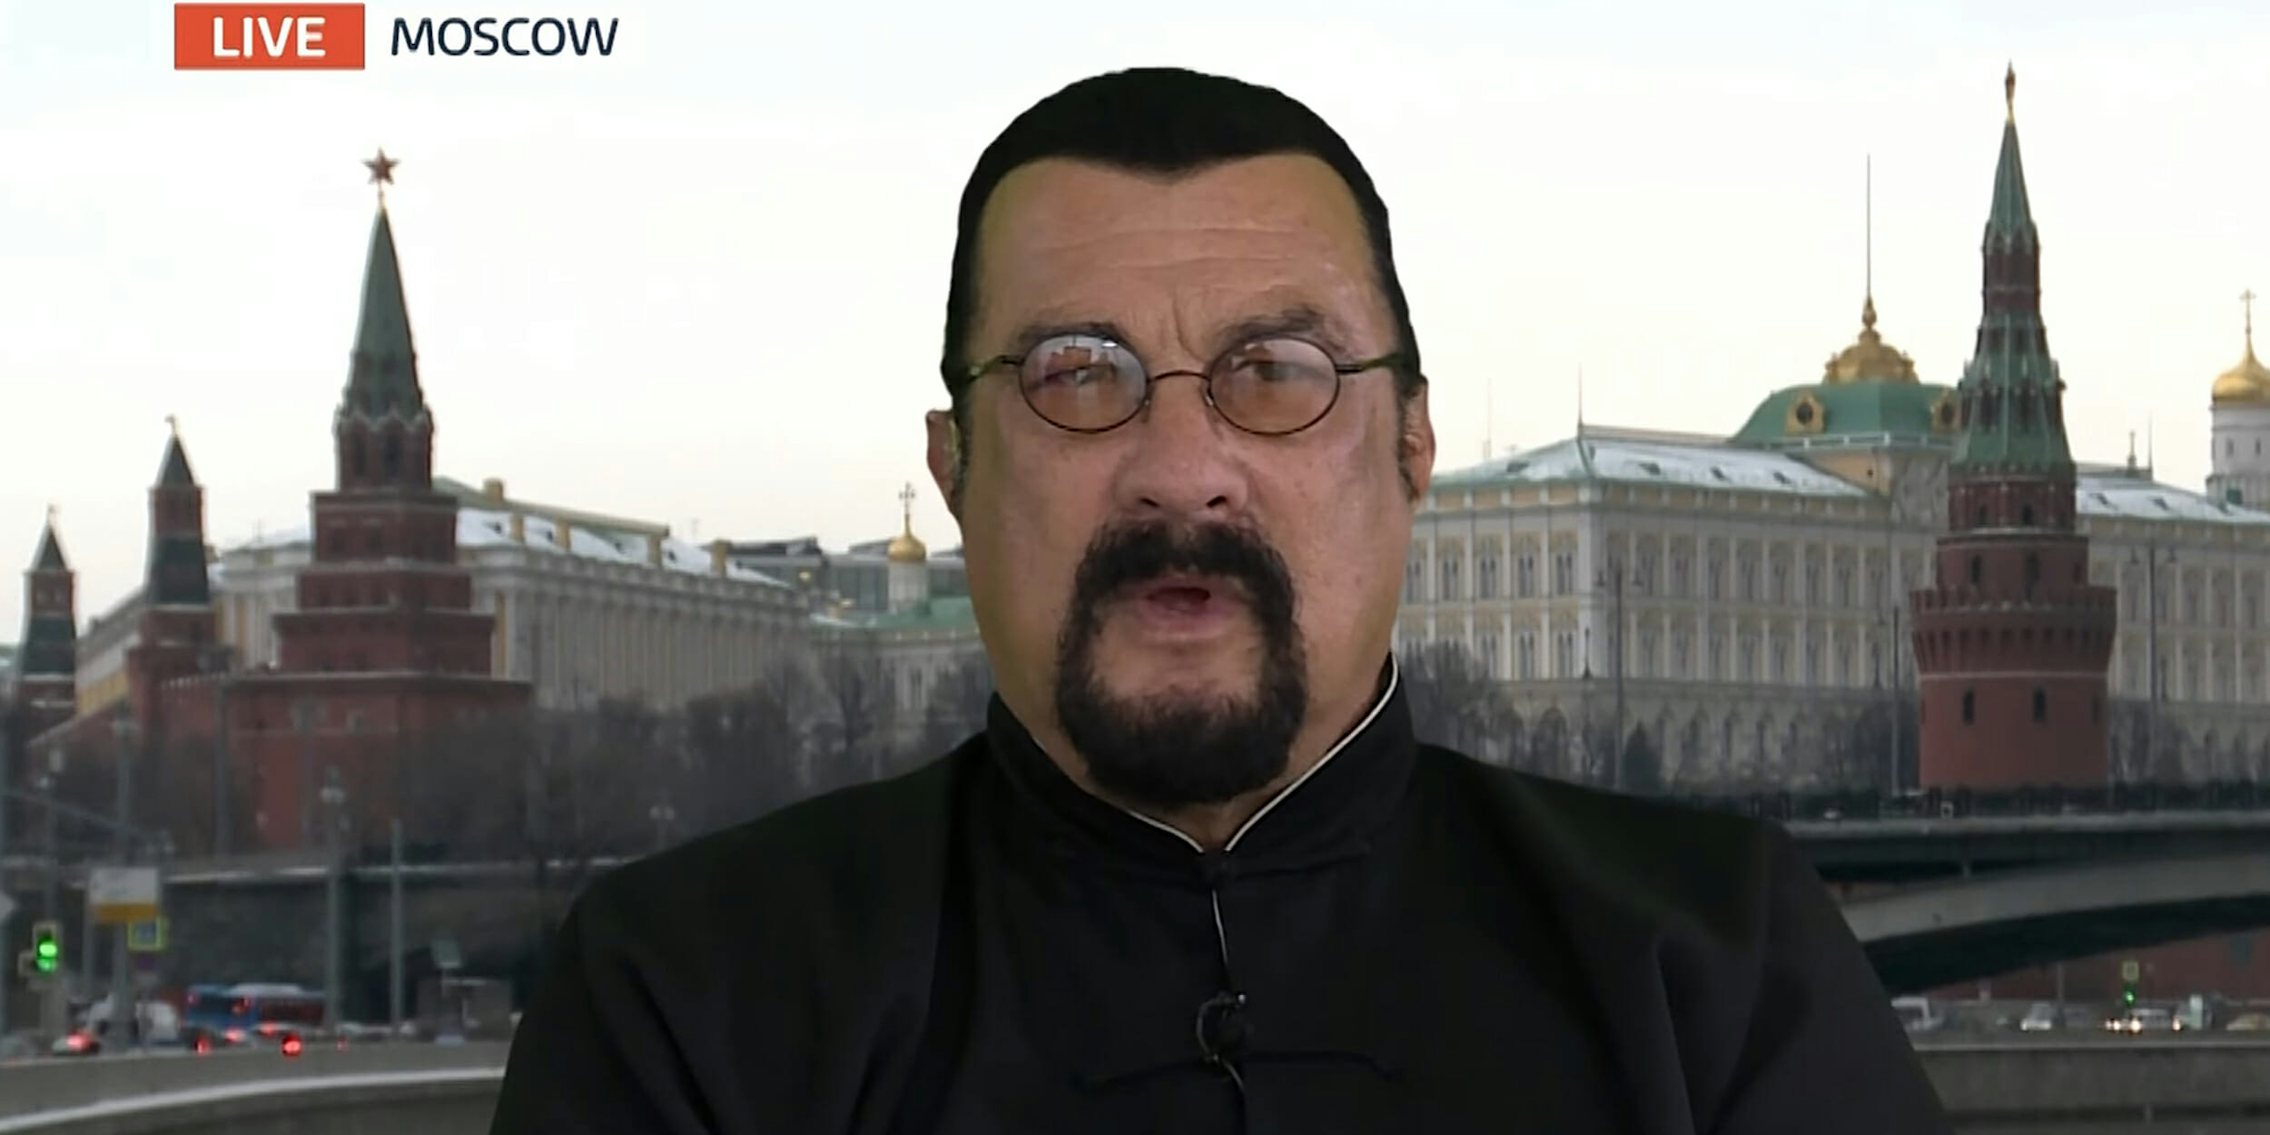 Steven Seagal, live from Moscow